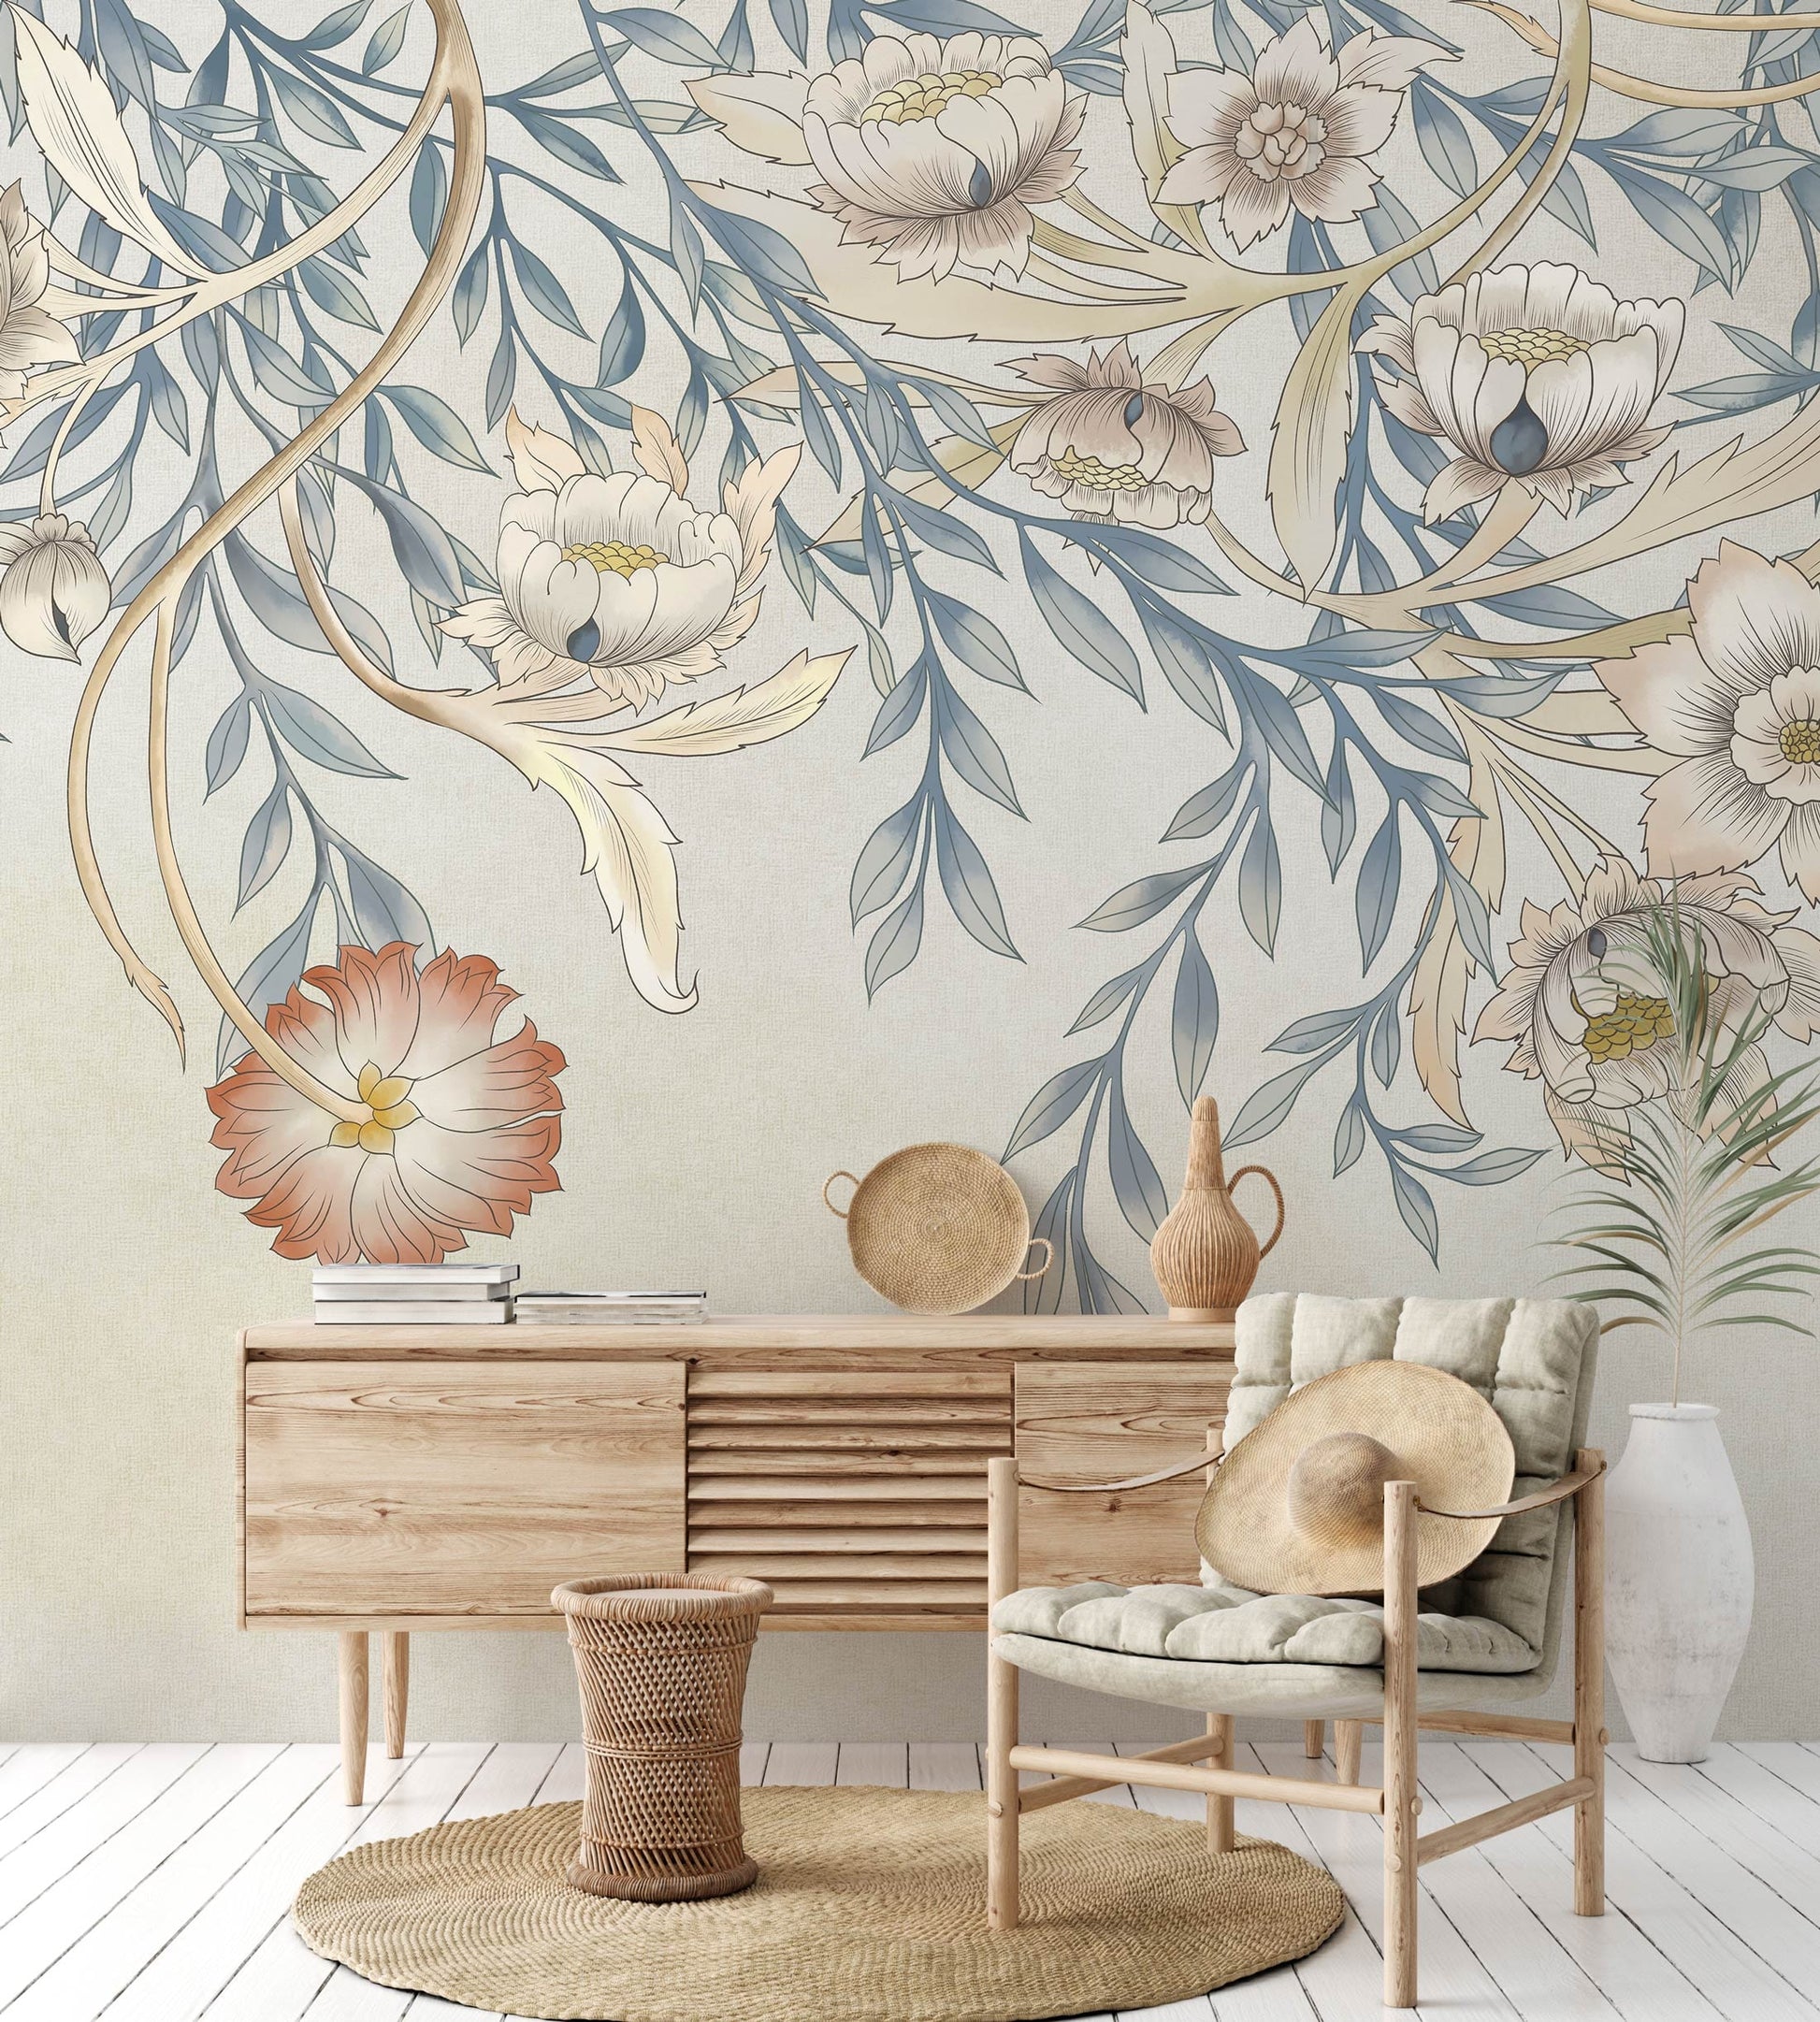 Wallpaper mural with pastel flowers for use as decoration in the hallway